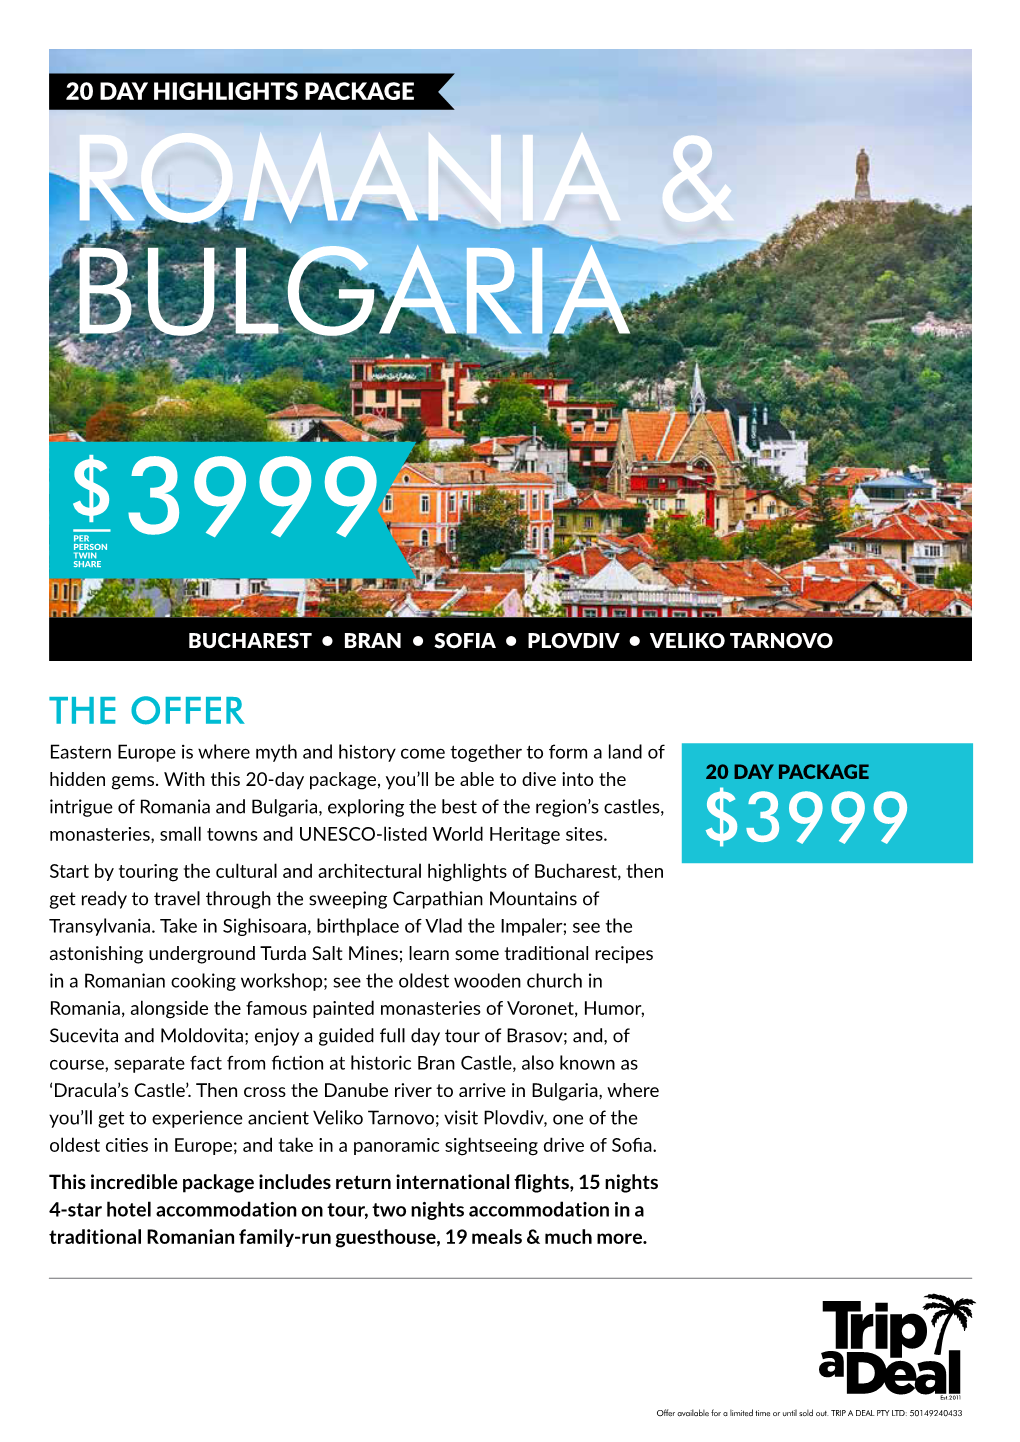 THE OFFER Eastern Europe Is Where Myth and History Come Together to Form a Land of Hidden Gems